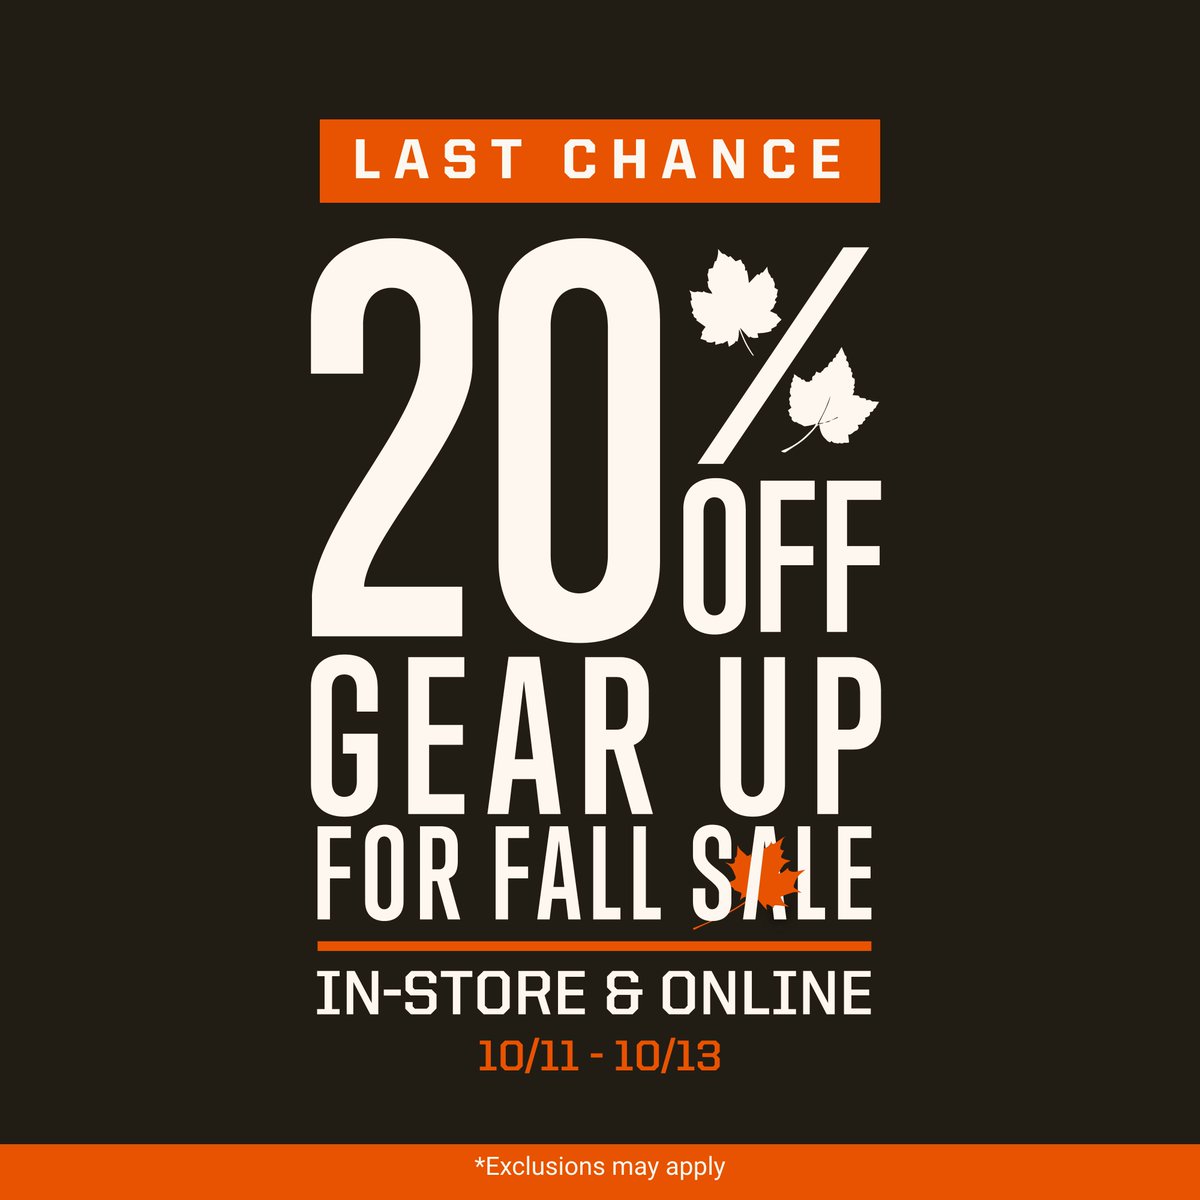 5 11 Tactical Looking To Pick Up Some New Styles From 5 11 Today Is Your Last Chance To Take Off For Our Fall Sale And Grab All That Gear You Ve